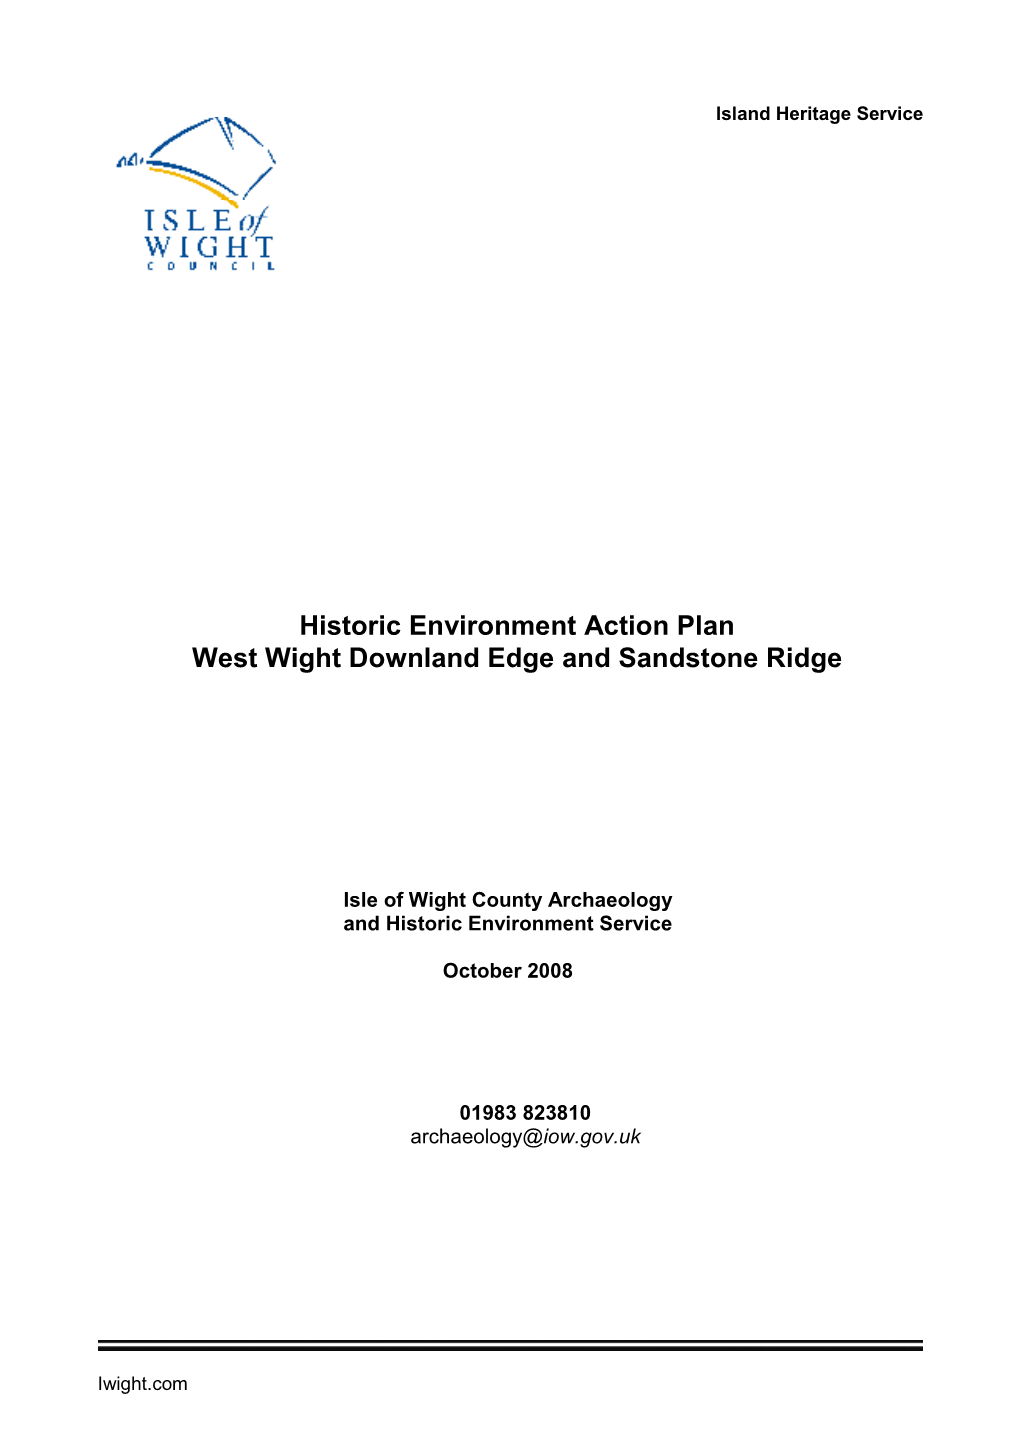 Historic Environment Action Plan West Wight Downland Edge and Sandstone Ridge